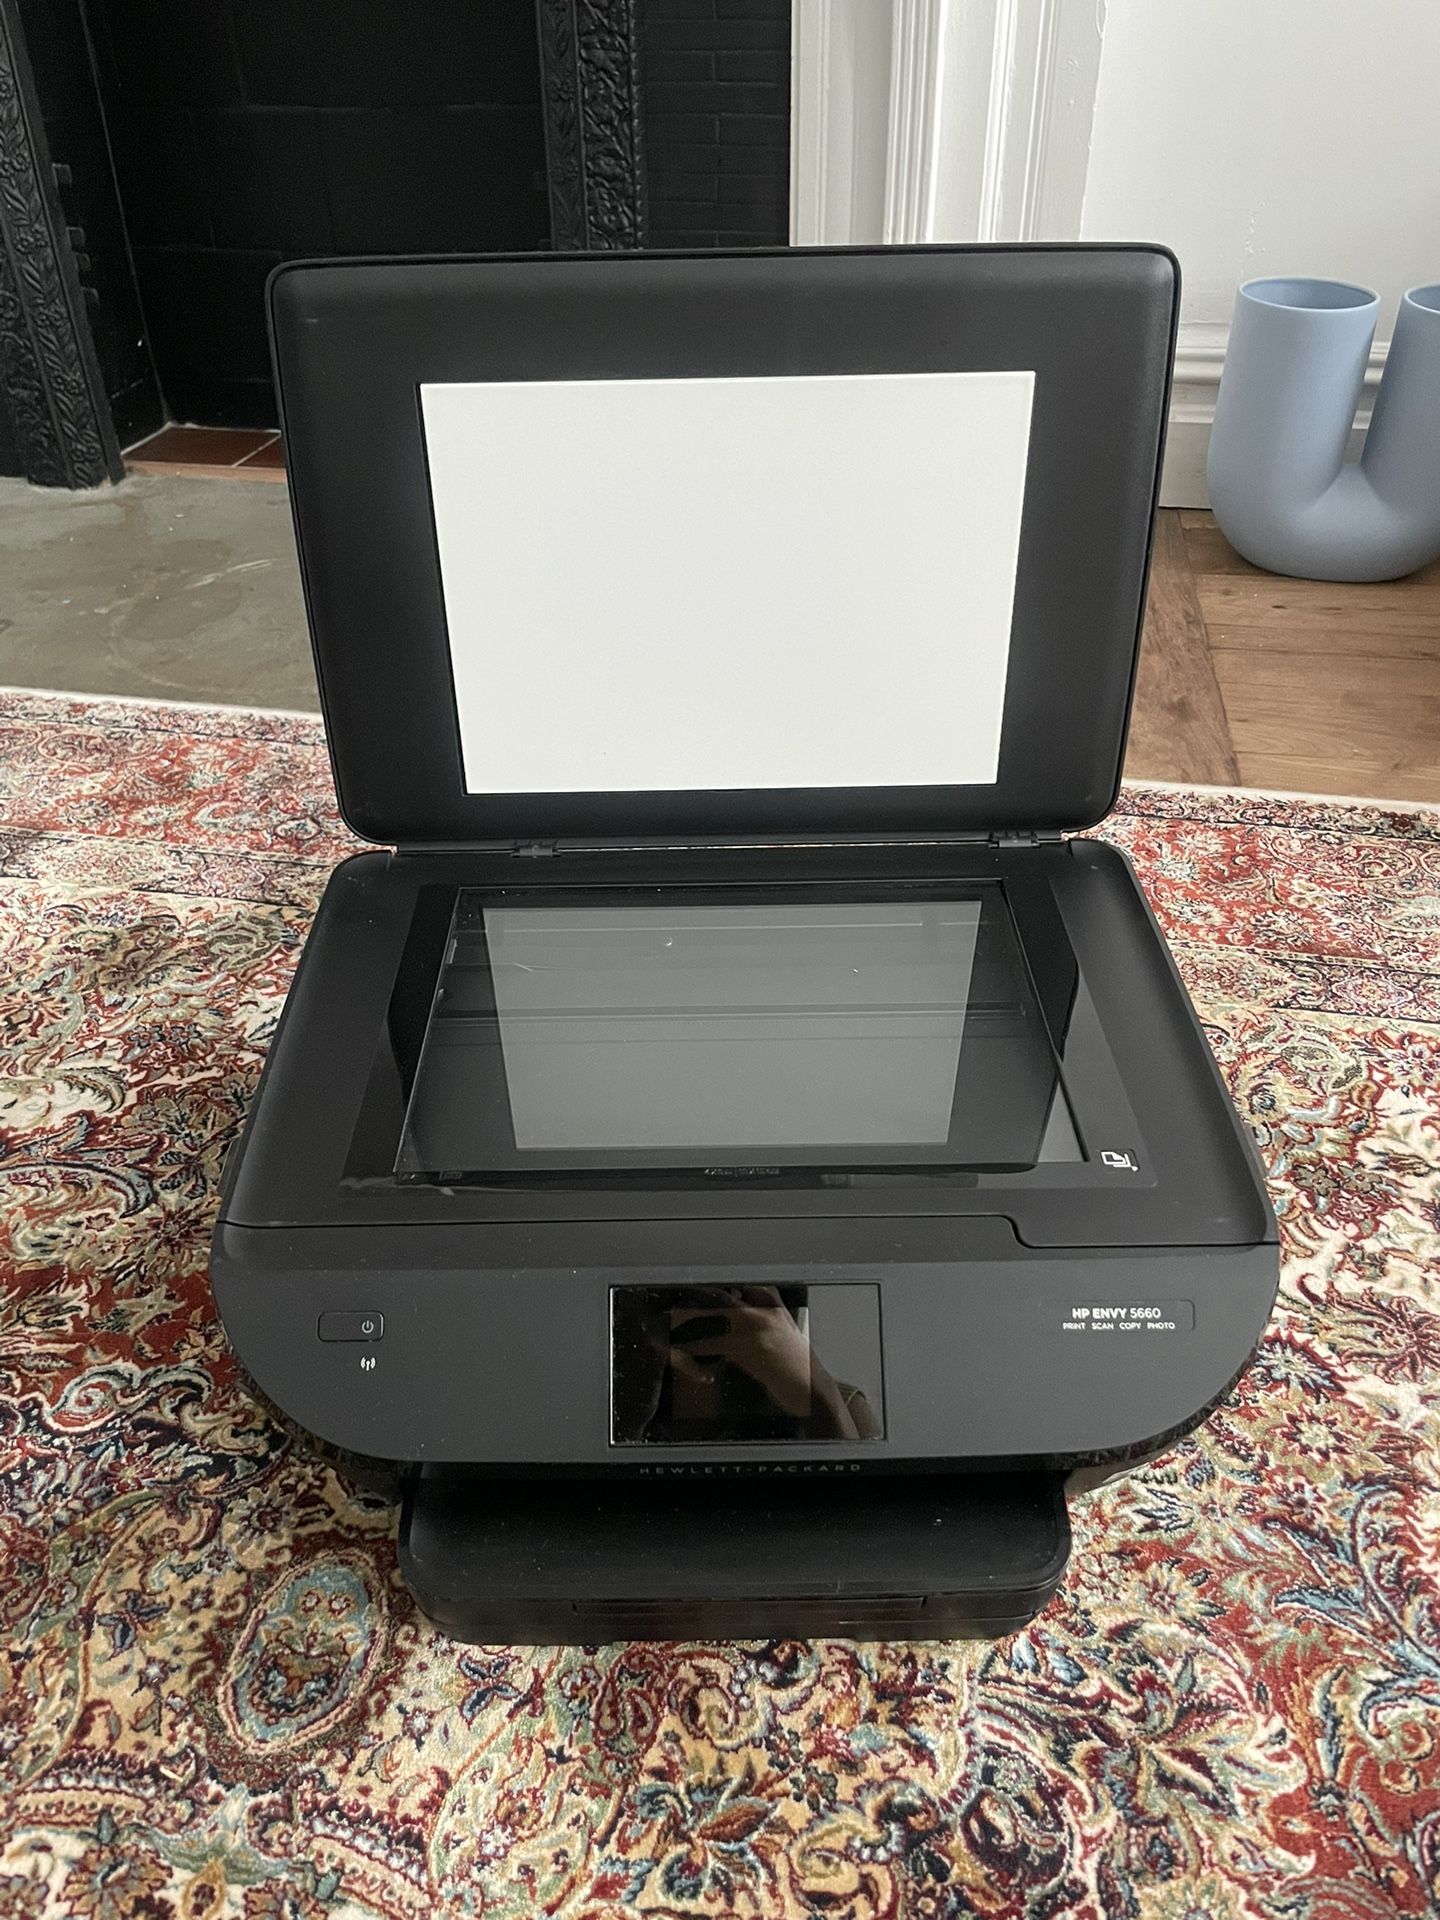 HP Envy 5660 All-In-One Printer